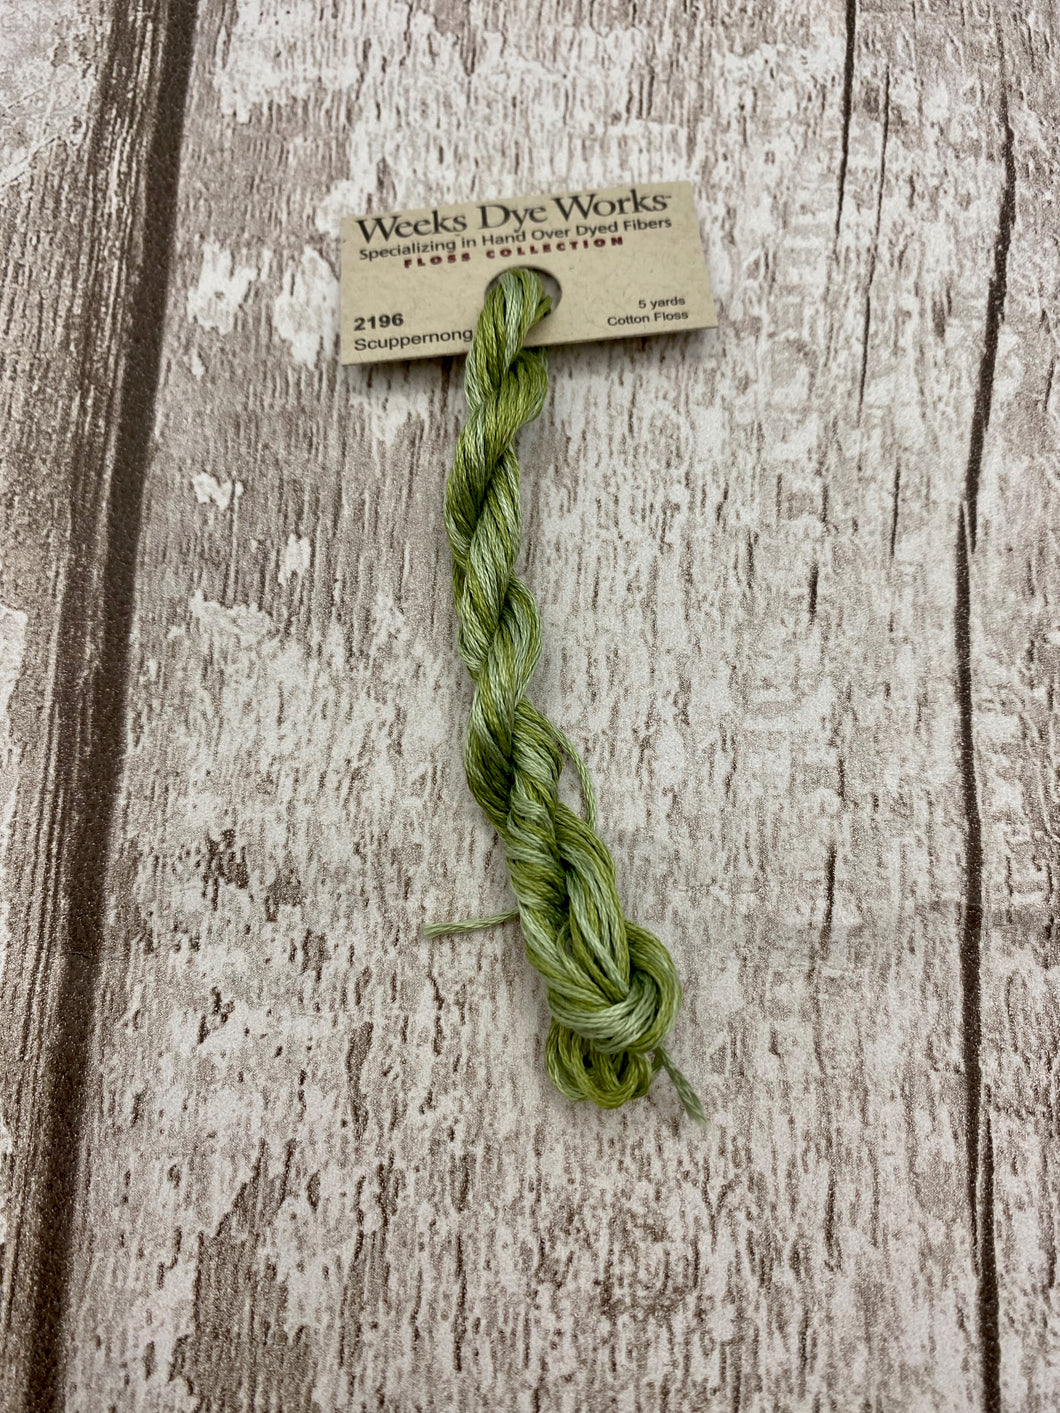 Scuppernong (#2196) Weeks Dye Works 6-strand cotton floss